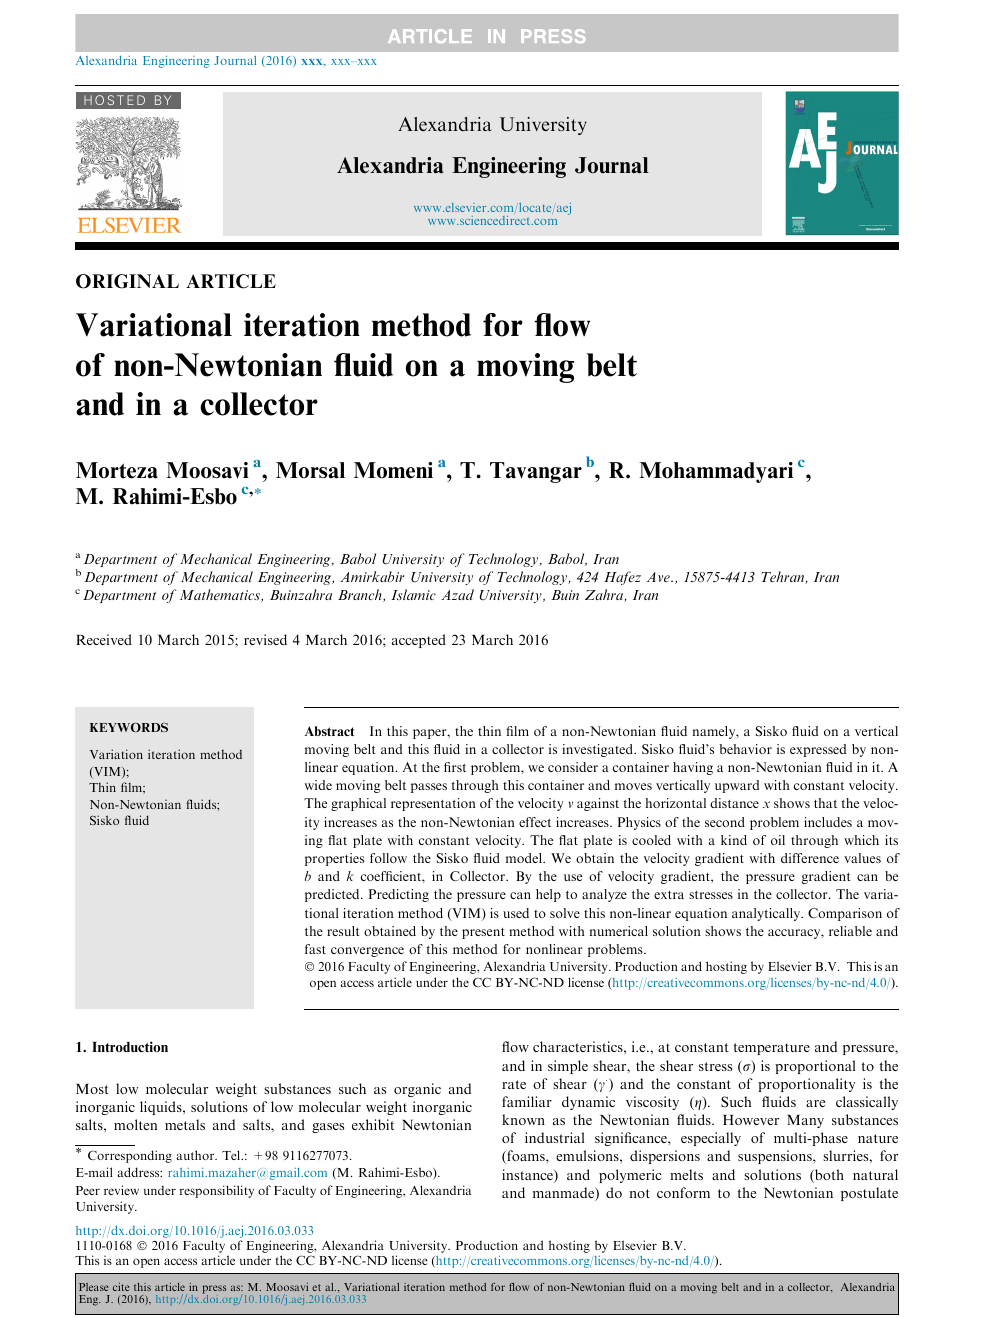 Variational Iteration Method For Flow Of Non Newtonian Fluid On A Moving Belt And In A Collector Topic Of Research Paper In Mathematics Download Scholarly Article Pdf And Read For Free On